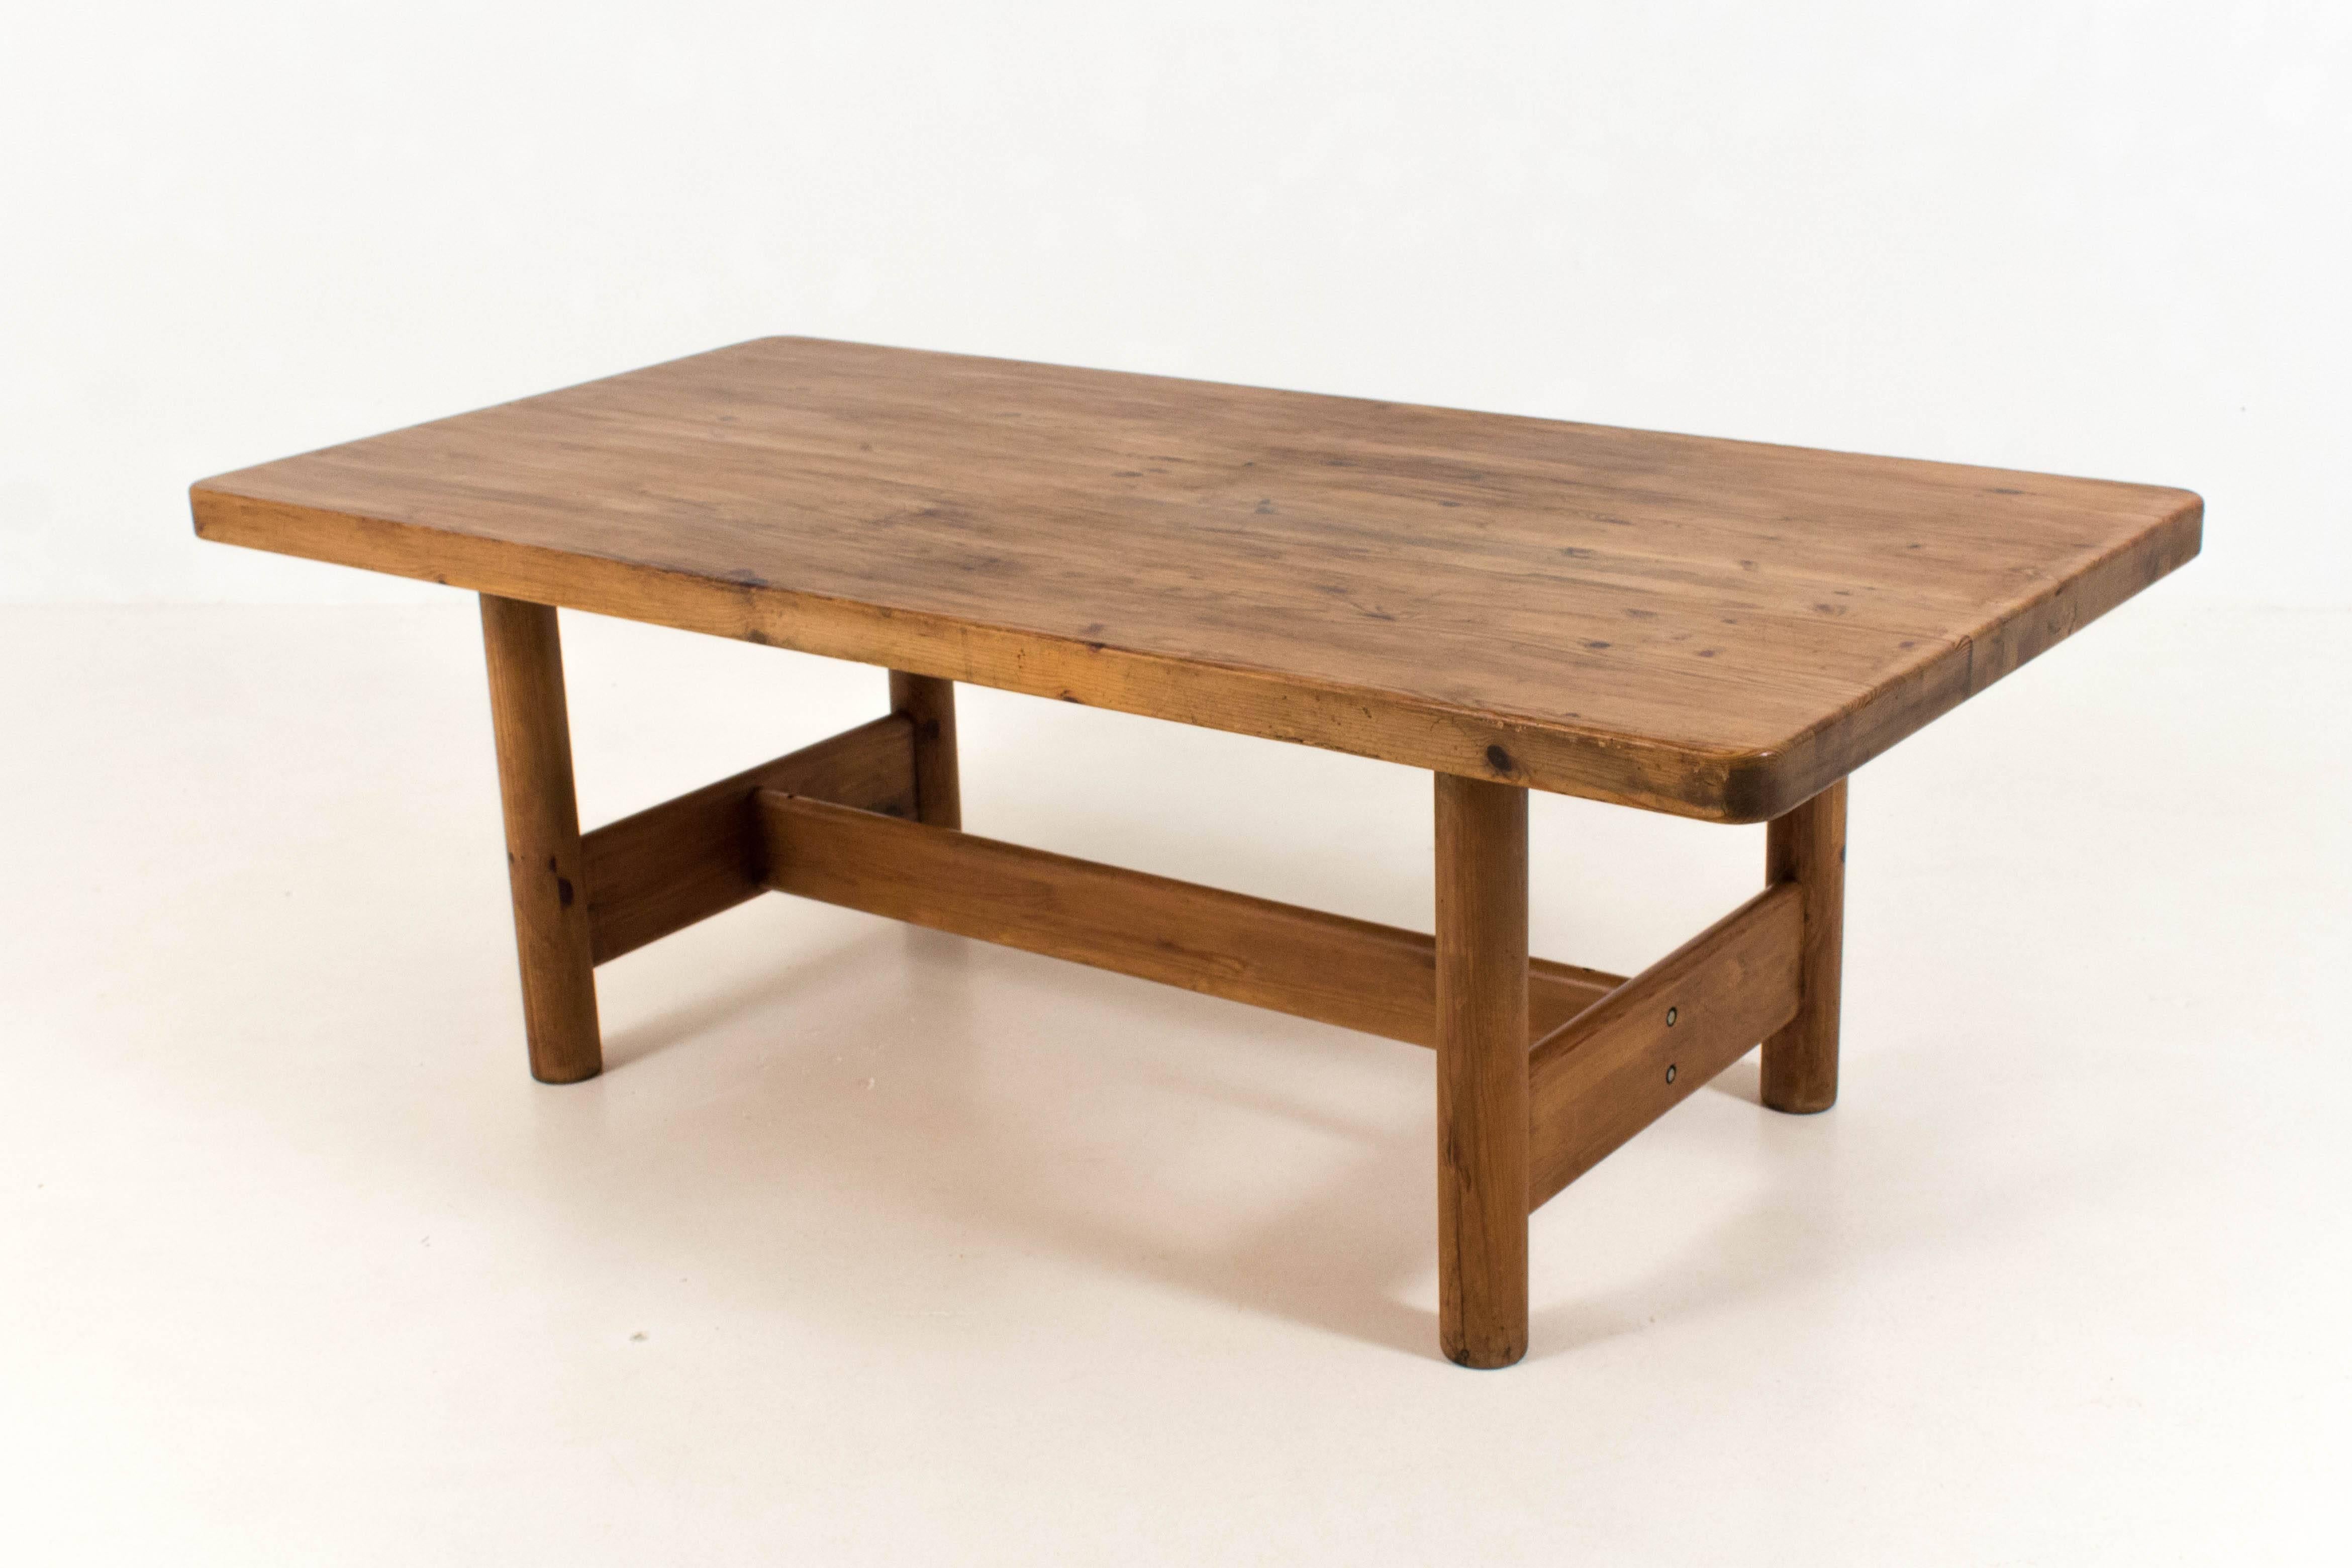 Rare and large Mid-Century Modern dining room table by Rainer Daumiller for
Hirtshals Savvaerk Denmark, 1970s.
Solid pine and in good original condition with minor wear consistent with age
and use, preserving a beautiful patina.